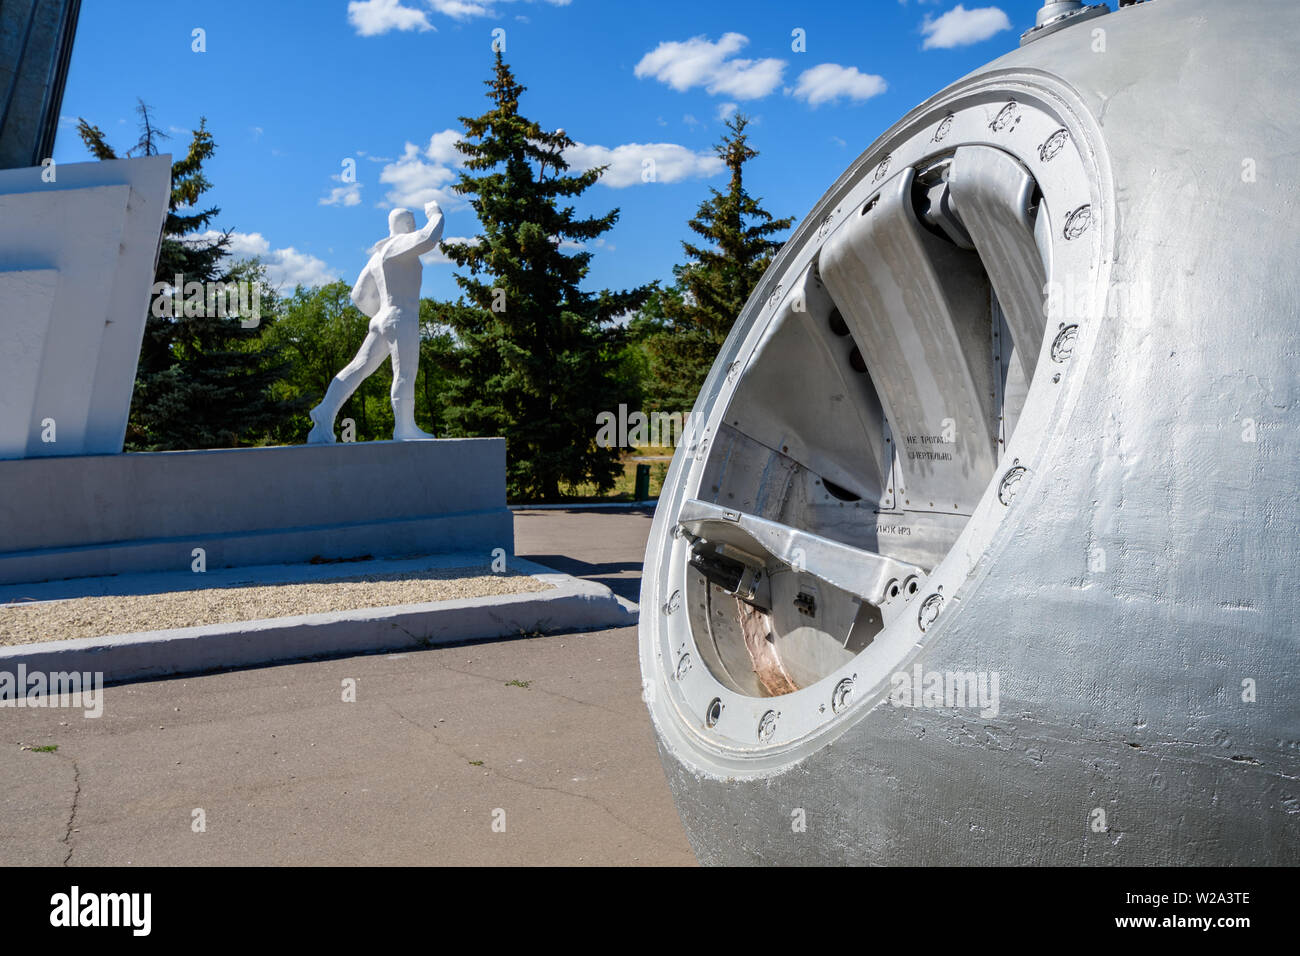 SMELOVKA, SARATOV, RUSSIA - JULY 2019: Place of landing of the first cosmonaut Yuri Gagarin. Stella and Monument. Lander spacecraft. Stock Photo